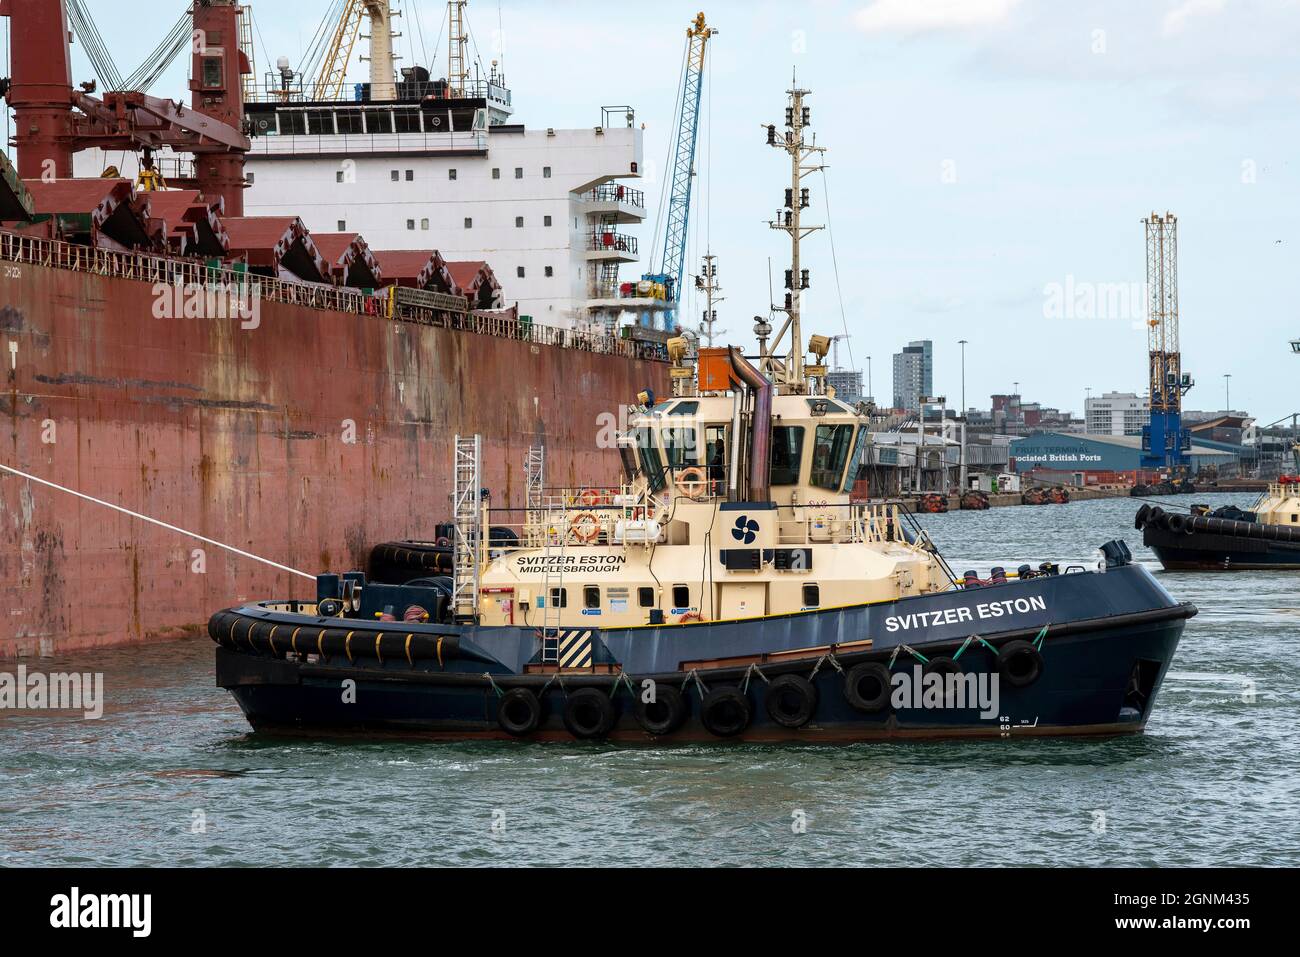 Southampton, England, UK. 2021. An ocean going tug manoeuvres a bulk carrier ship onto her berth in the port of Southampton. Stock Photo